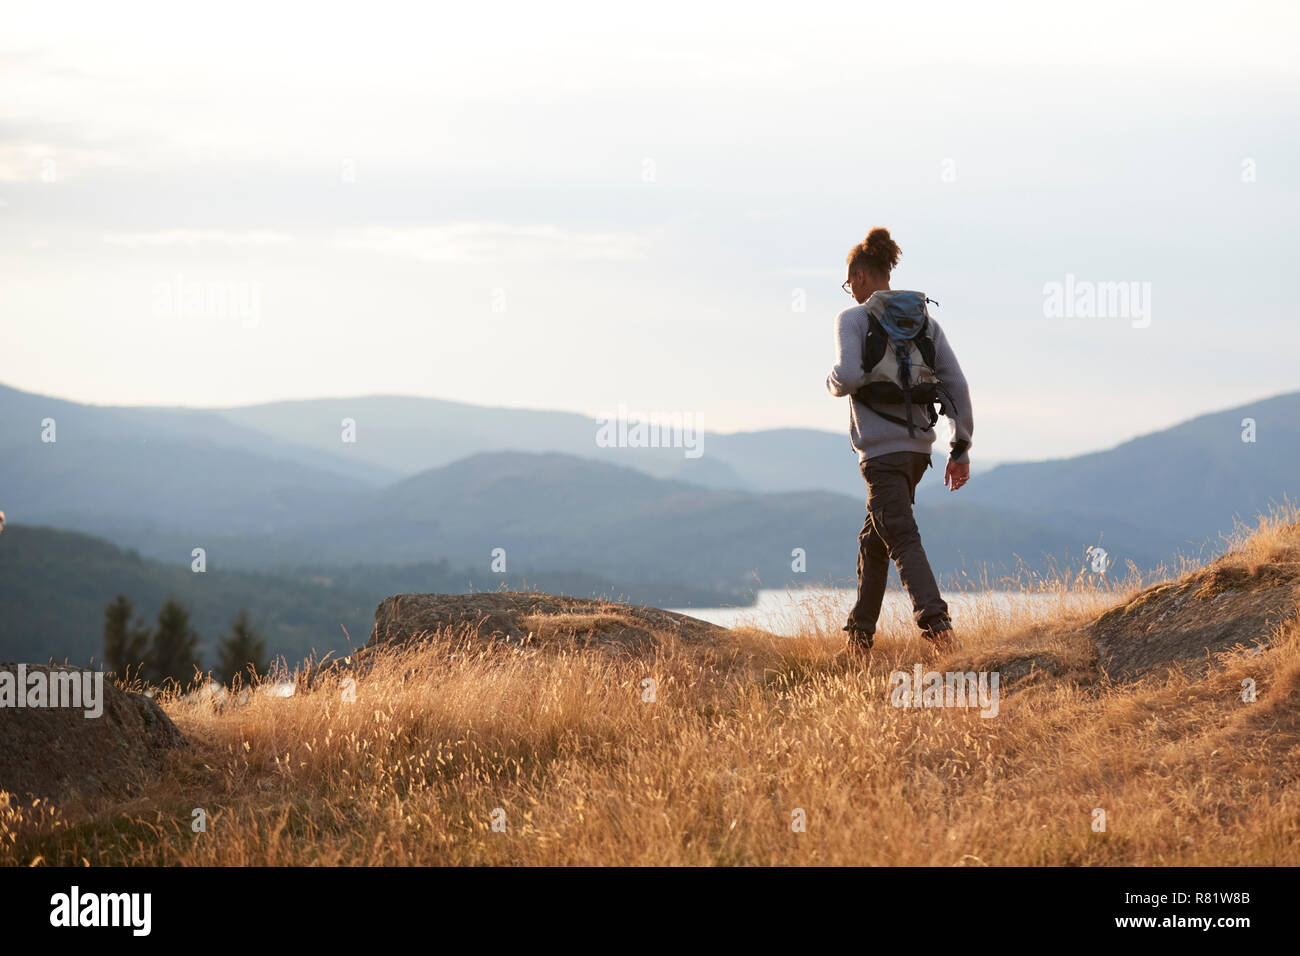 A young mixed race man hiking alone on a mountain peak, back view Stock Photo